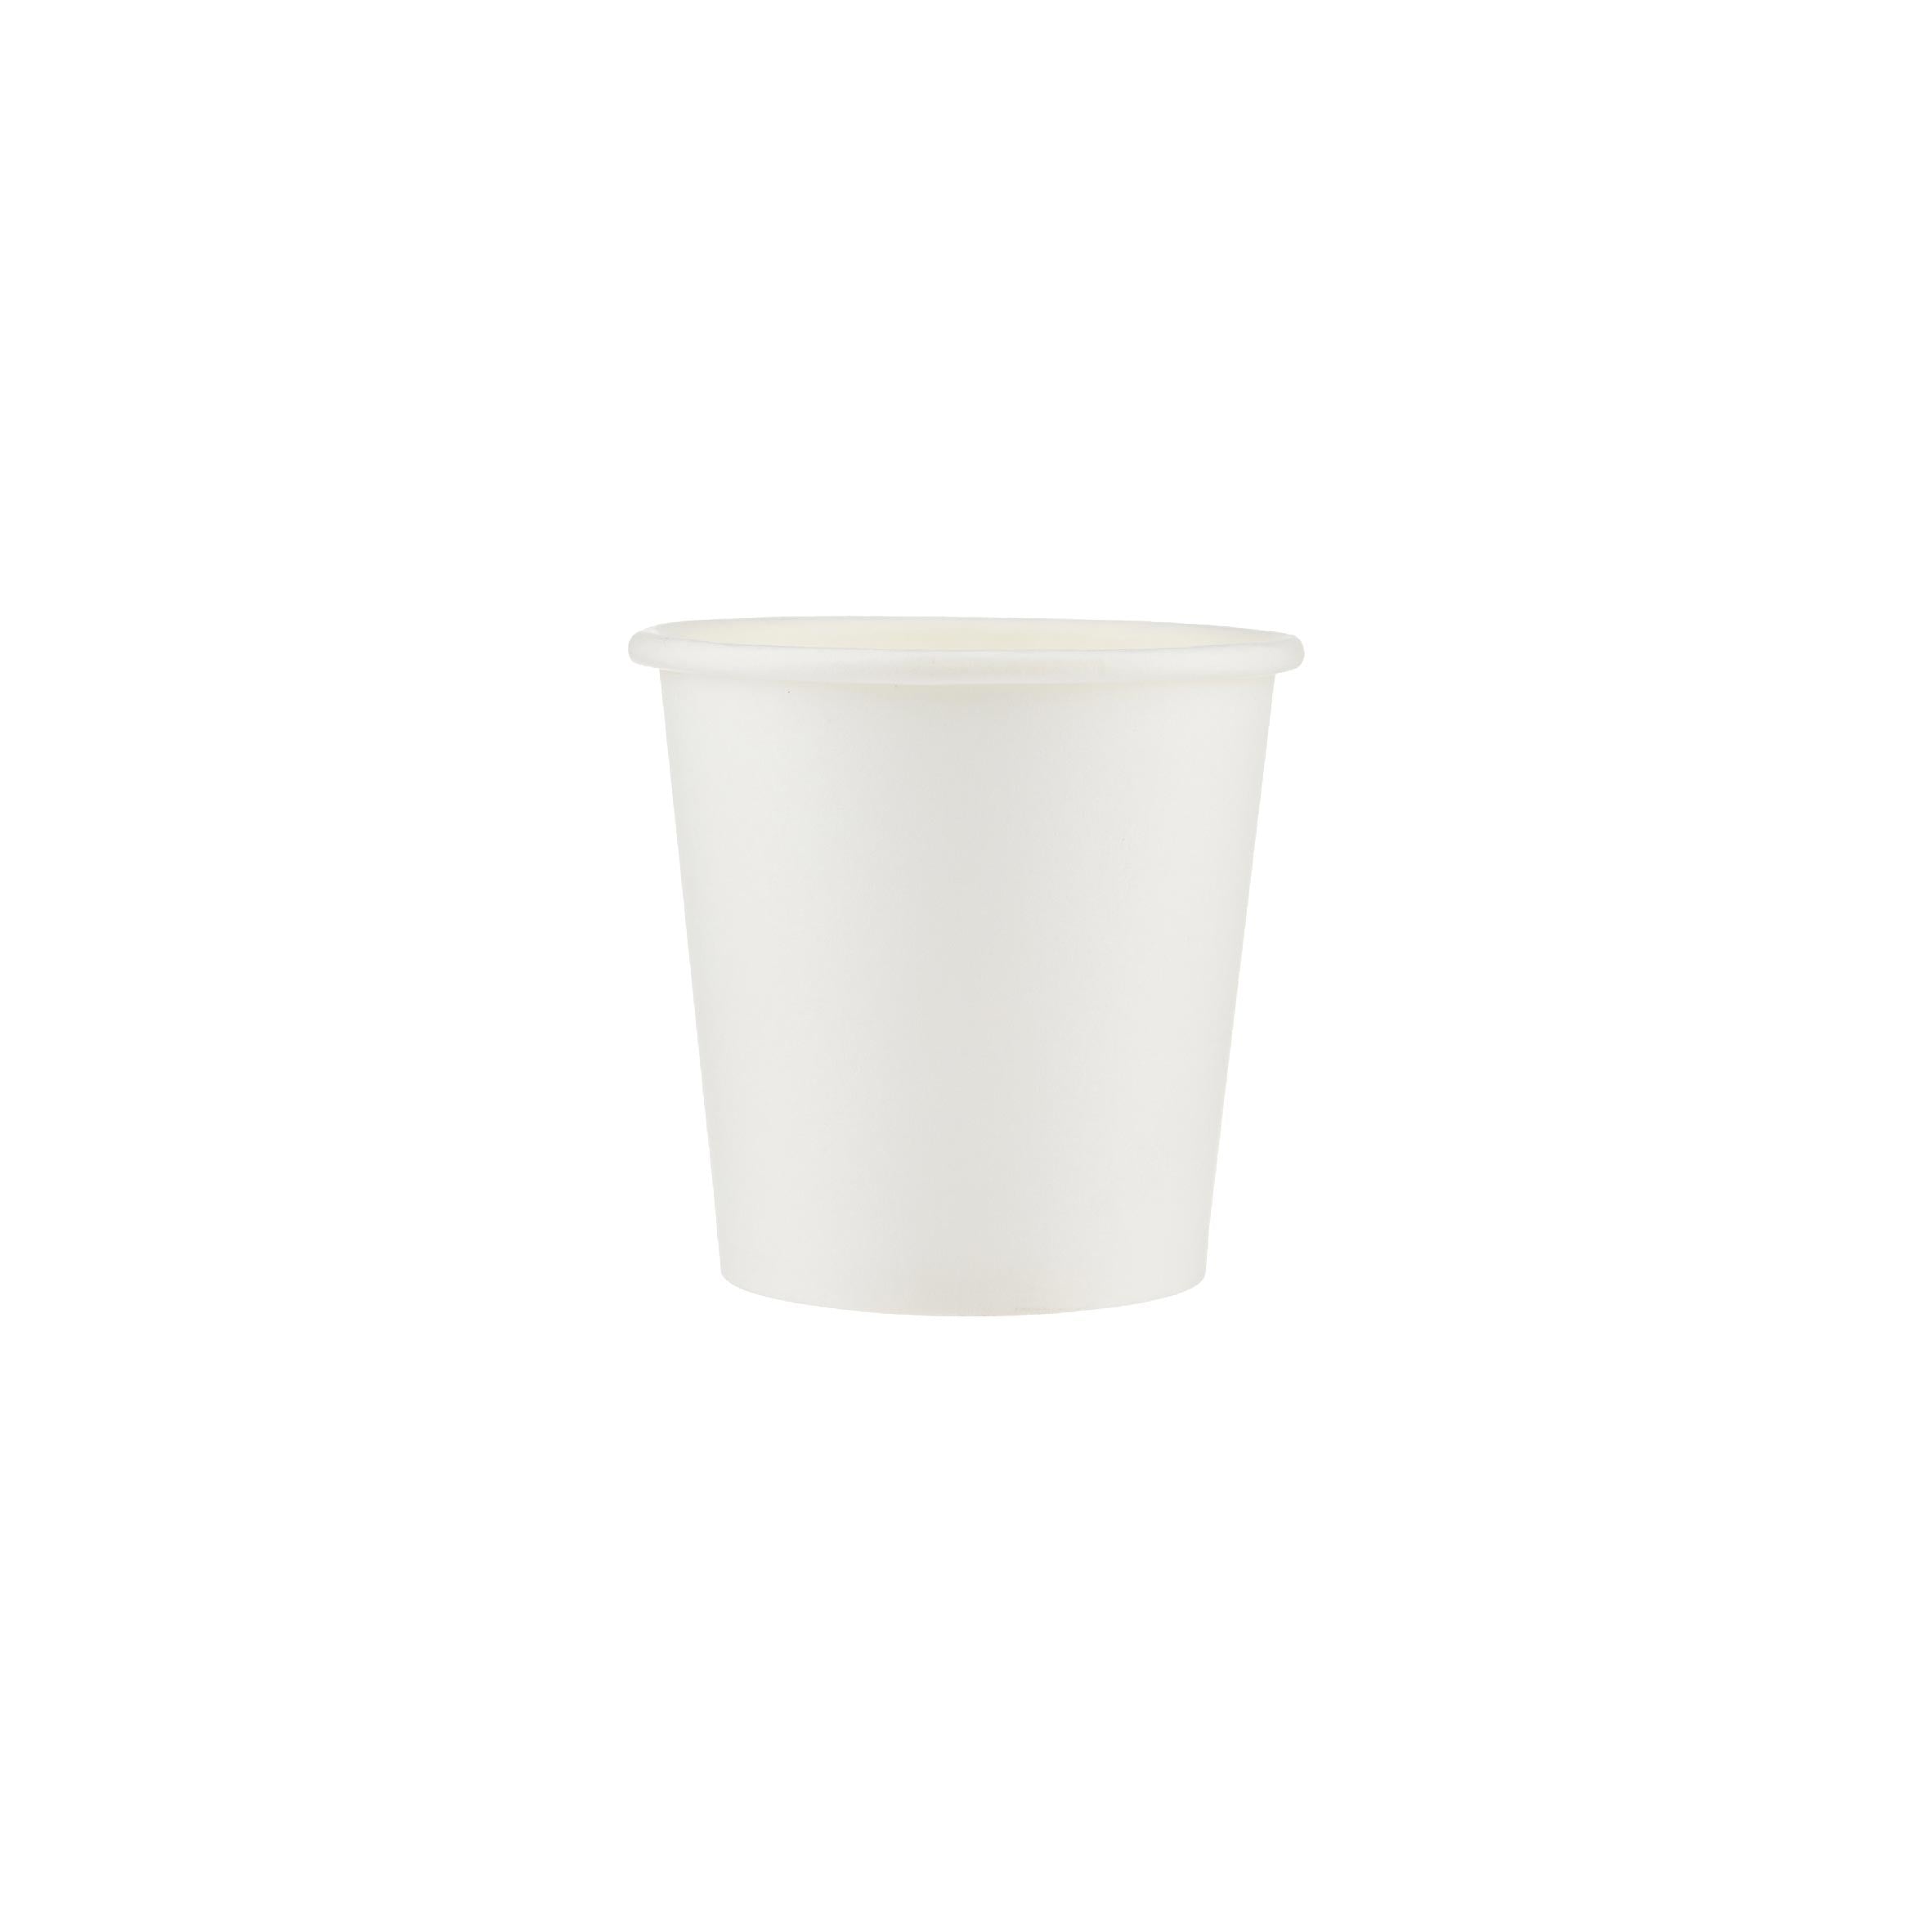 50 Pieces Heavy Duty White Single Wall Paper Cups